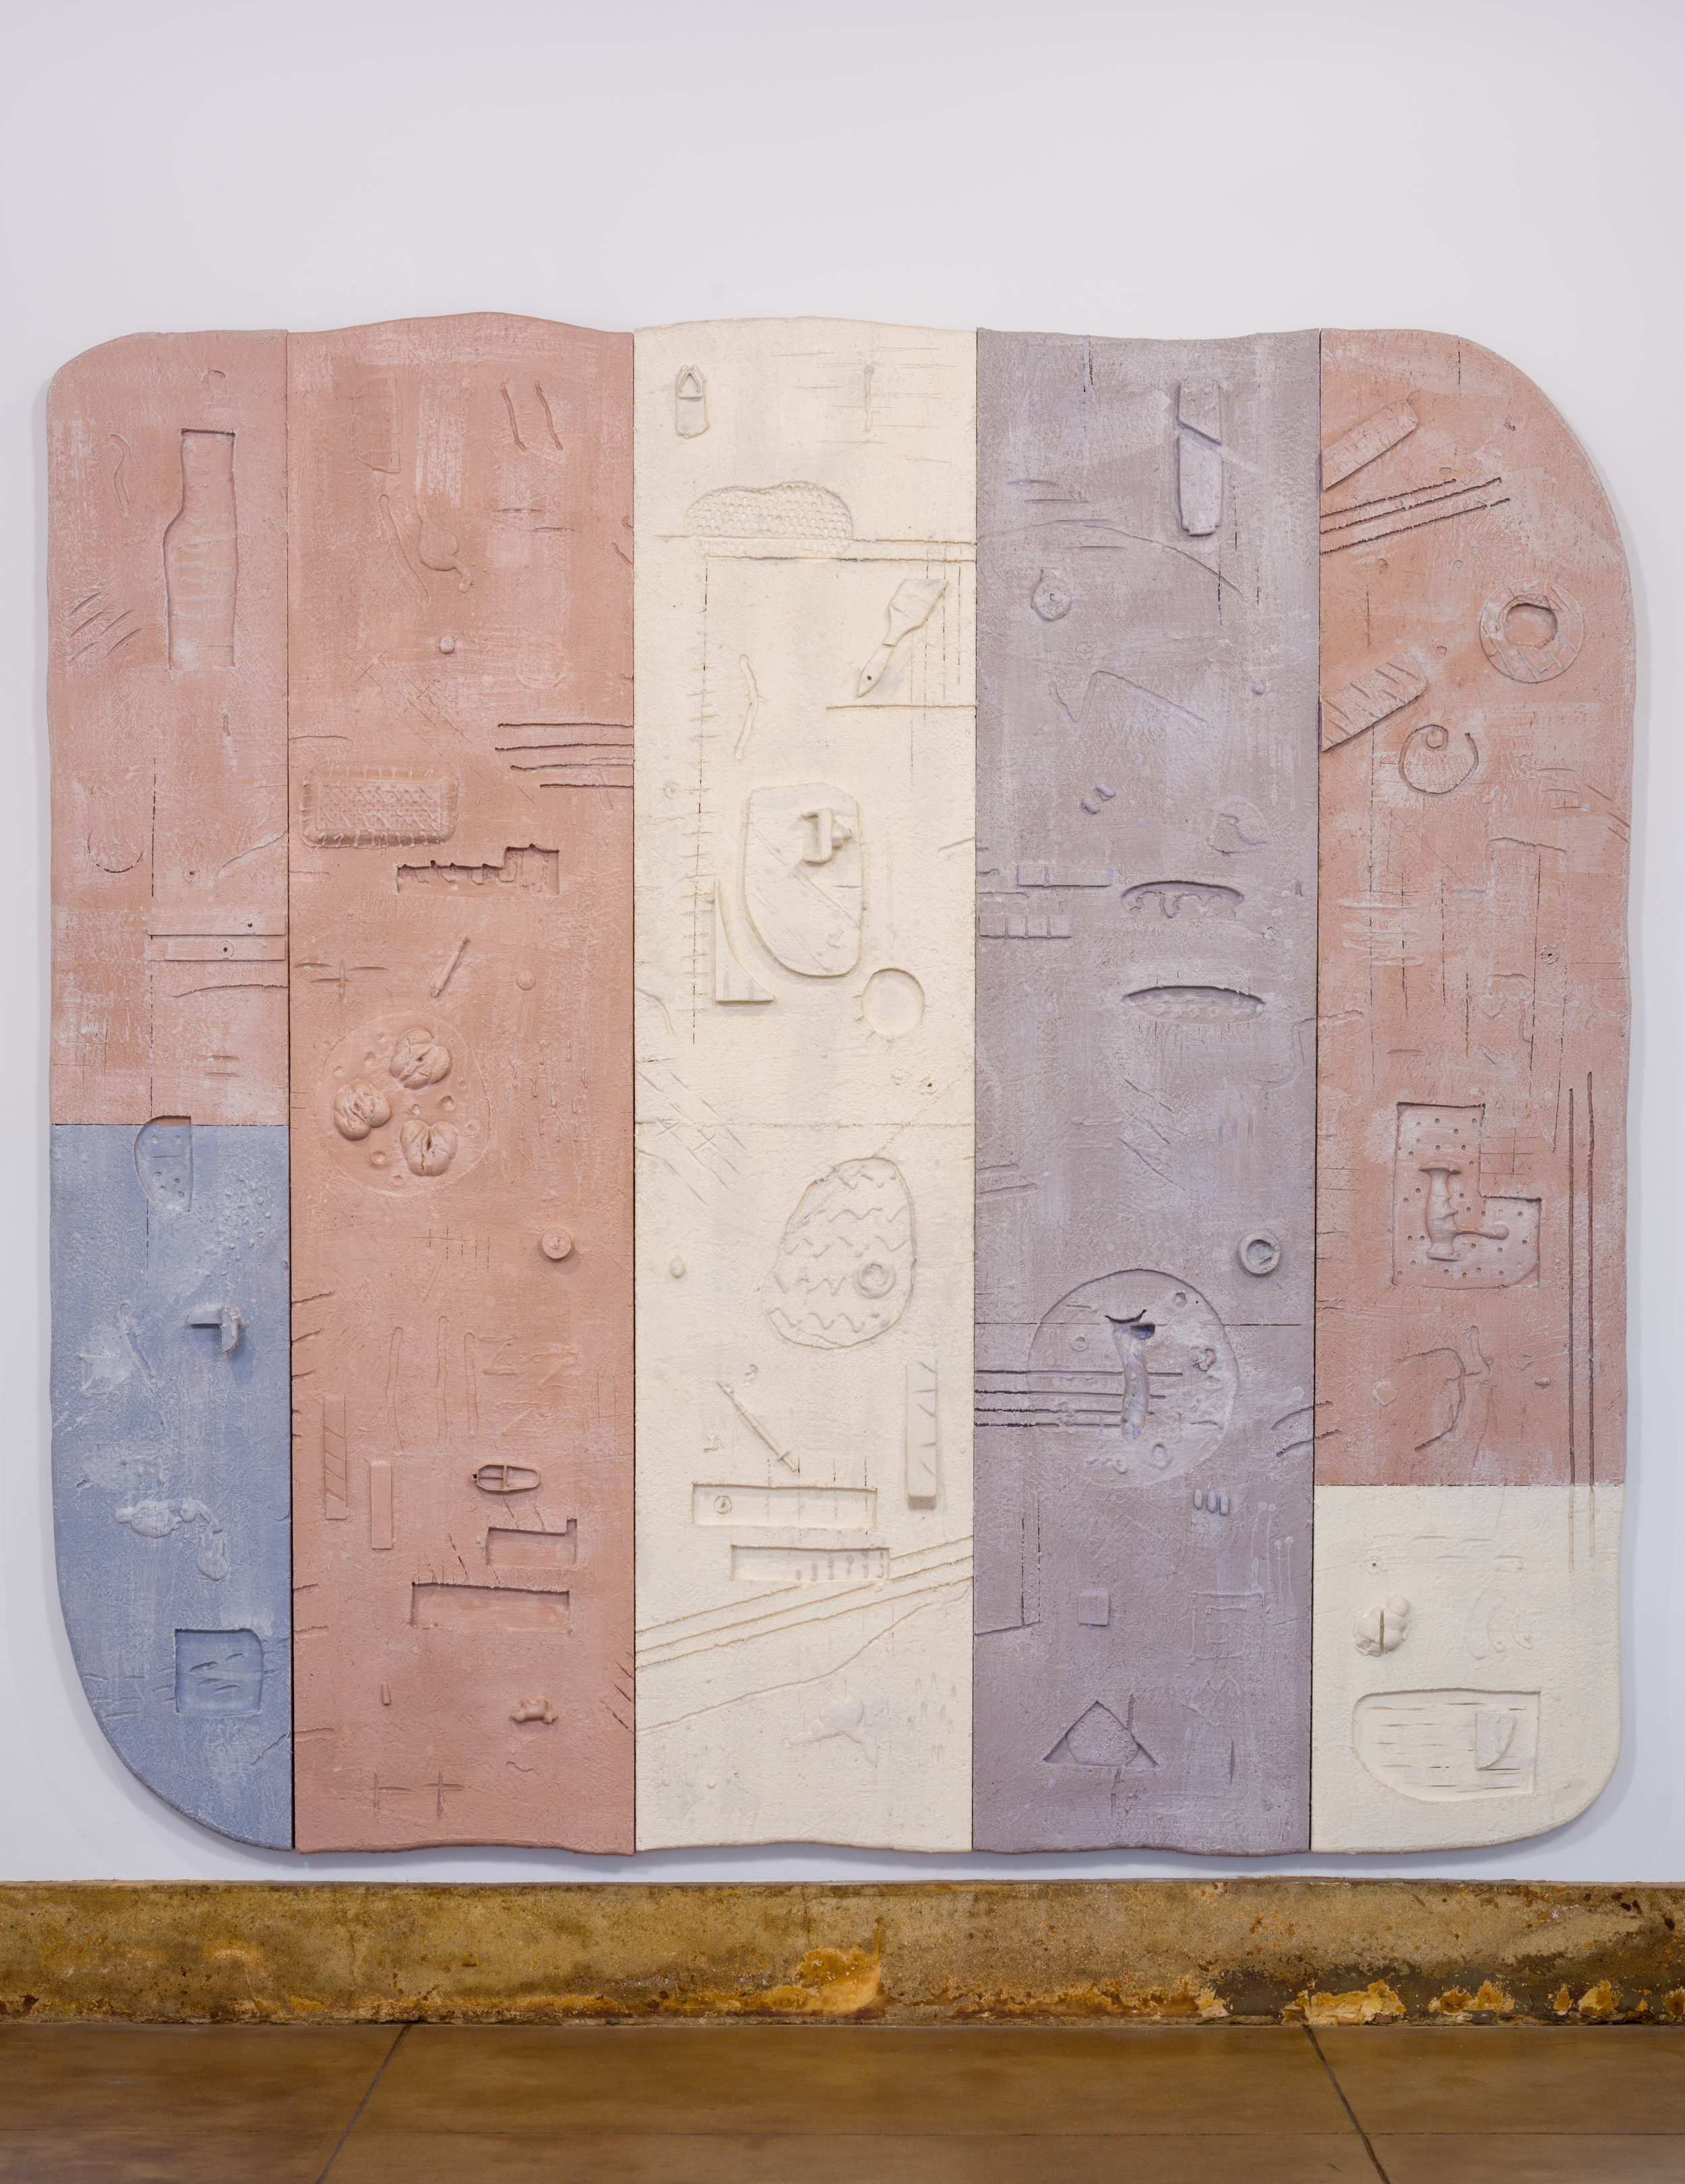   Don Edler   Pharmacopornographic Chimera  2017 Plywood, OSB, styrofoam, ultracal, sex toys, syringes, ‘male enhancement’ pills, birth control pills, knife, polymer latex, surf wax 80 x 80 x 2 inches, dimensions variable  Photo by Ruben Diaz 